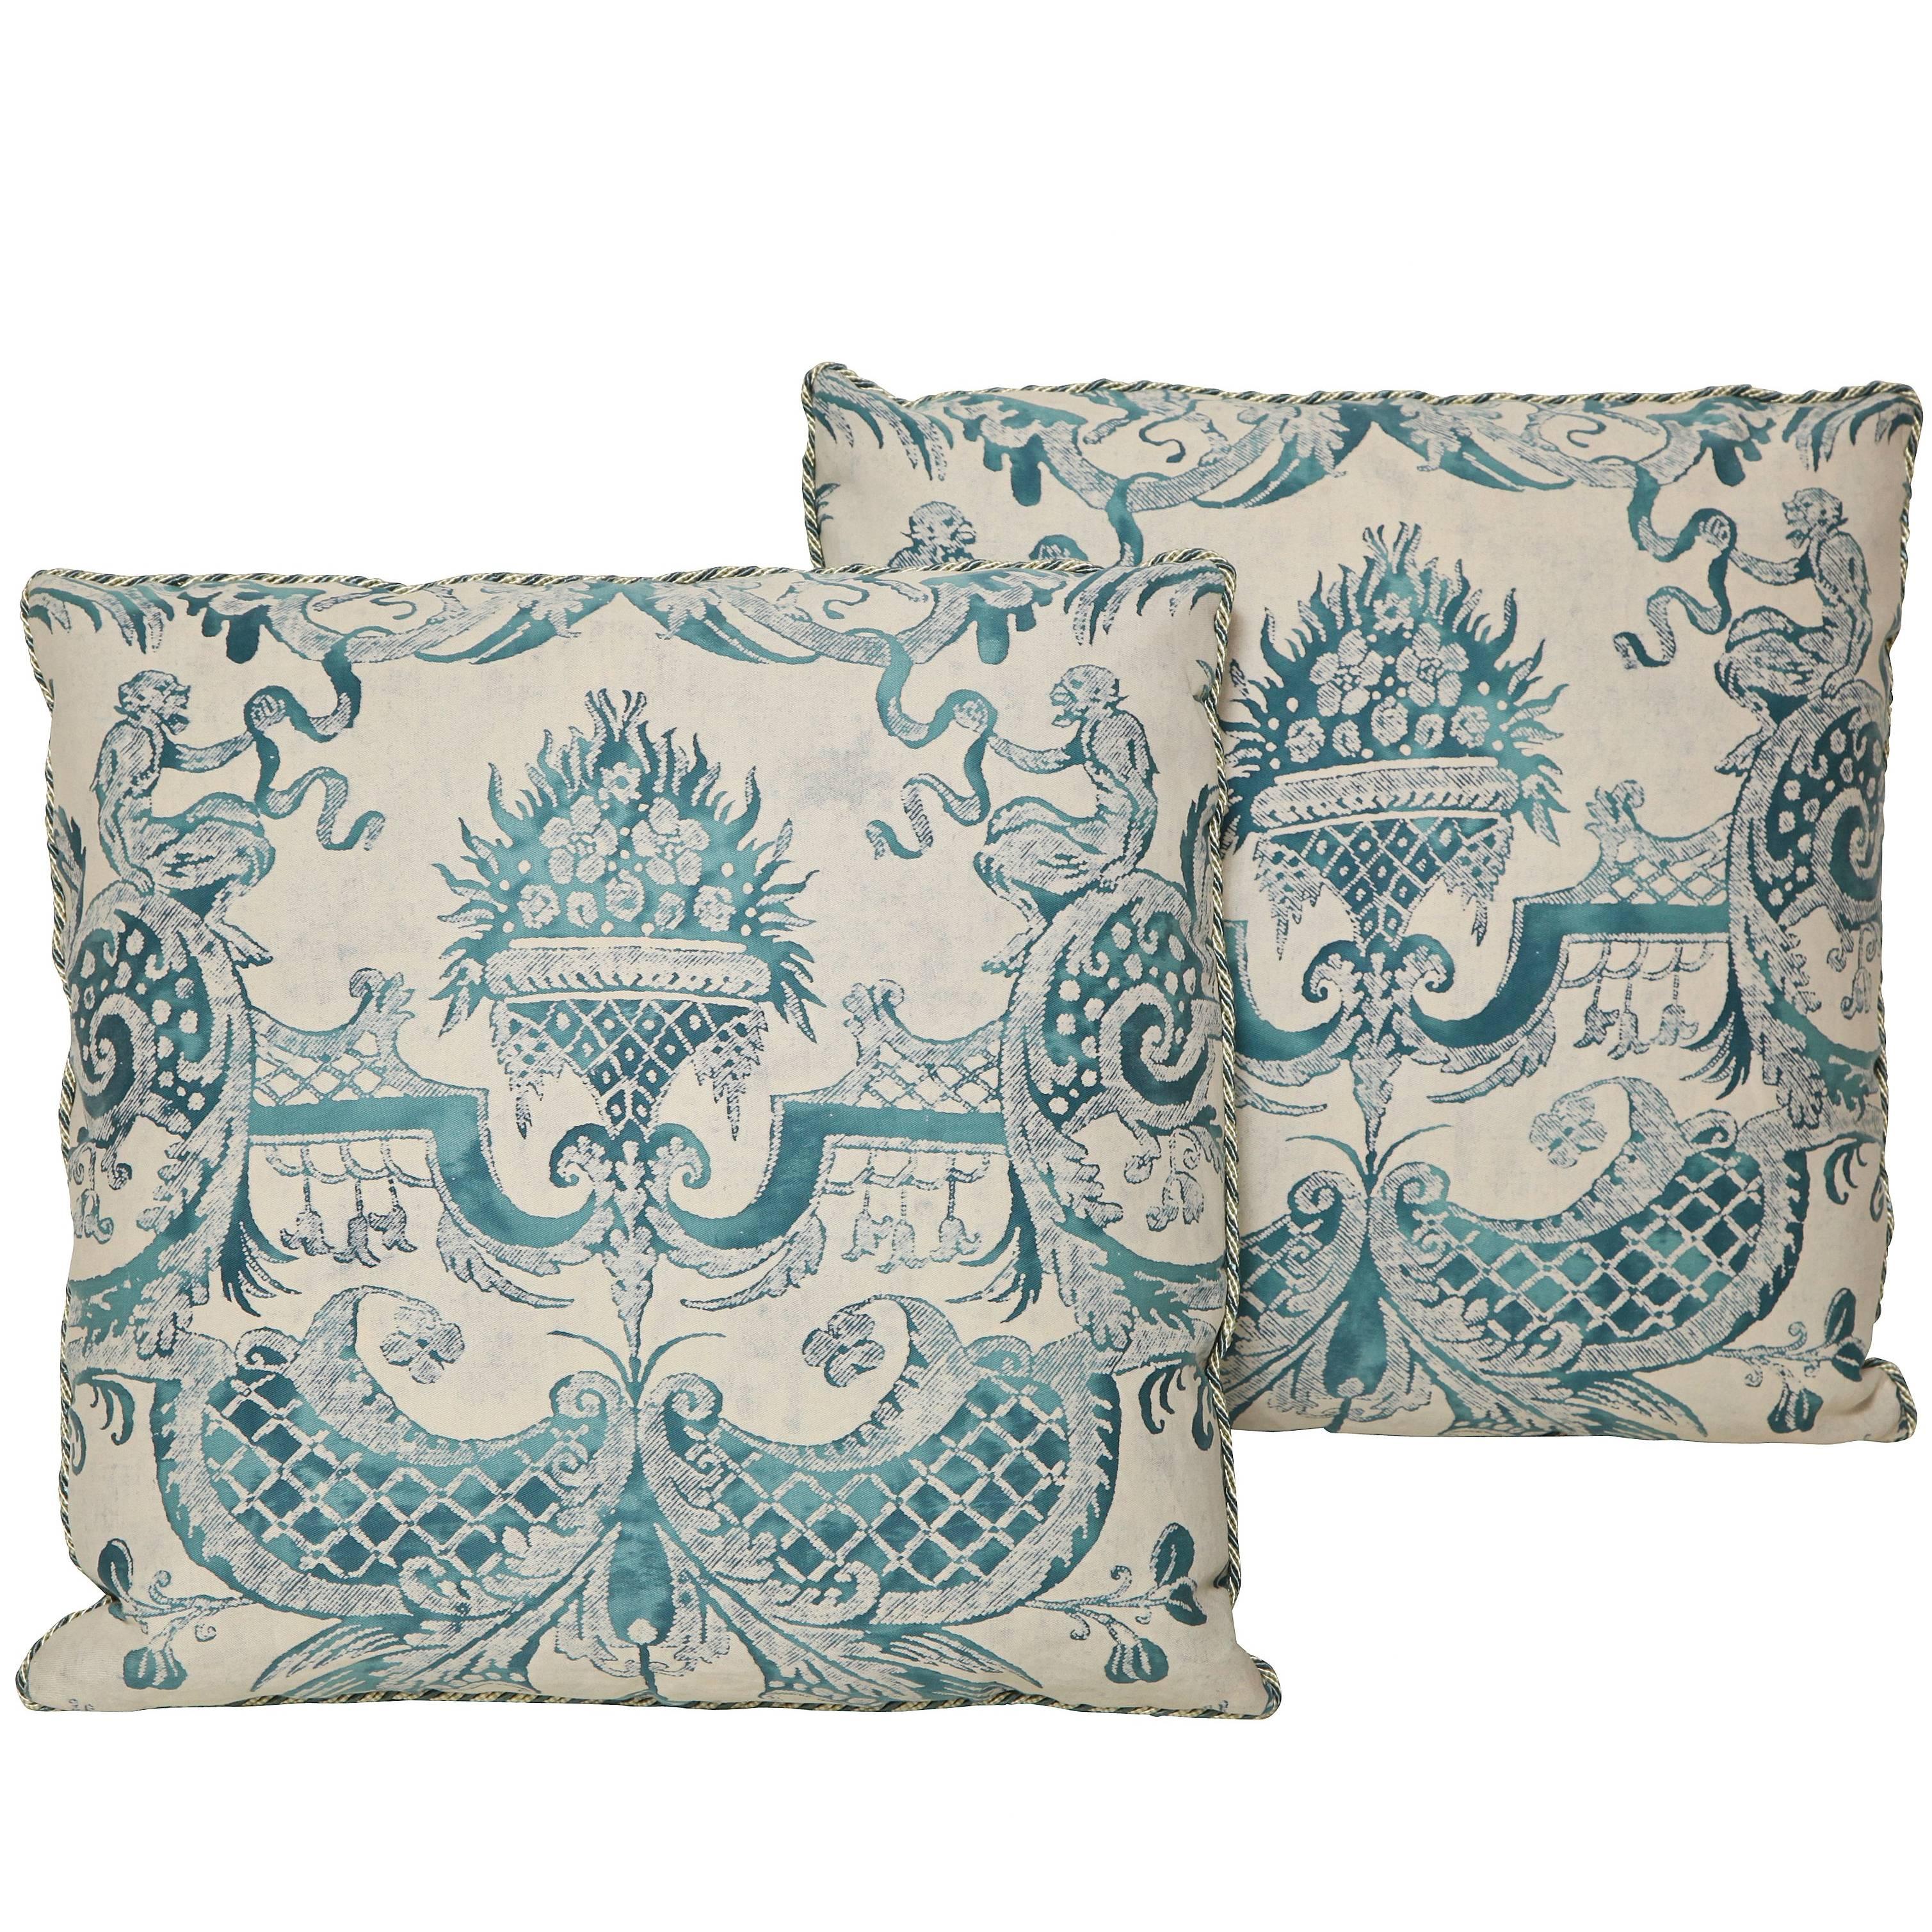 Pair of Fortuny Fabric Cushions in the Mazzarino Pattern